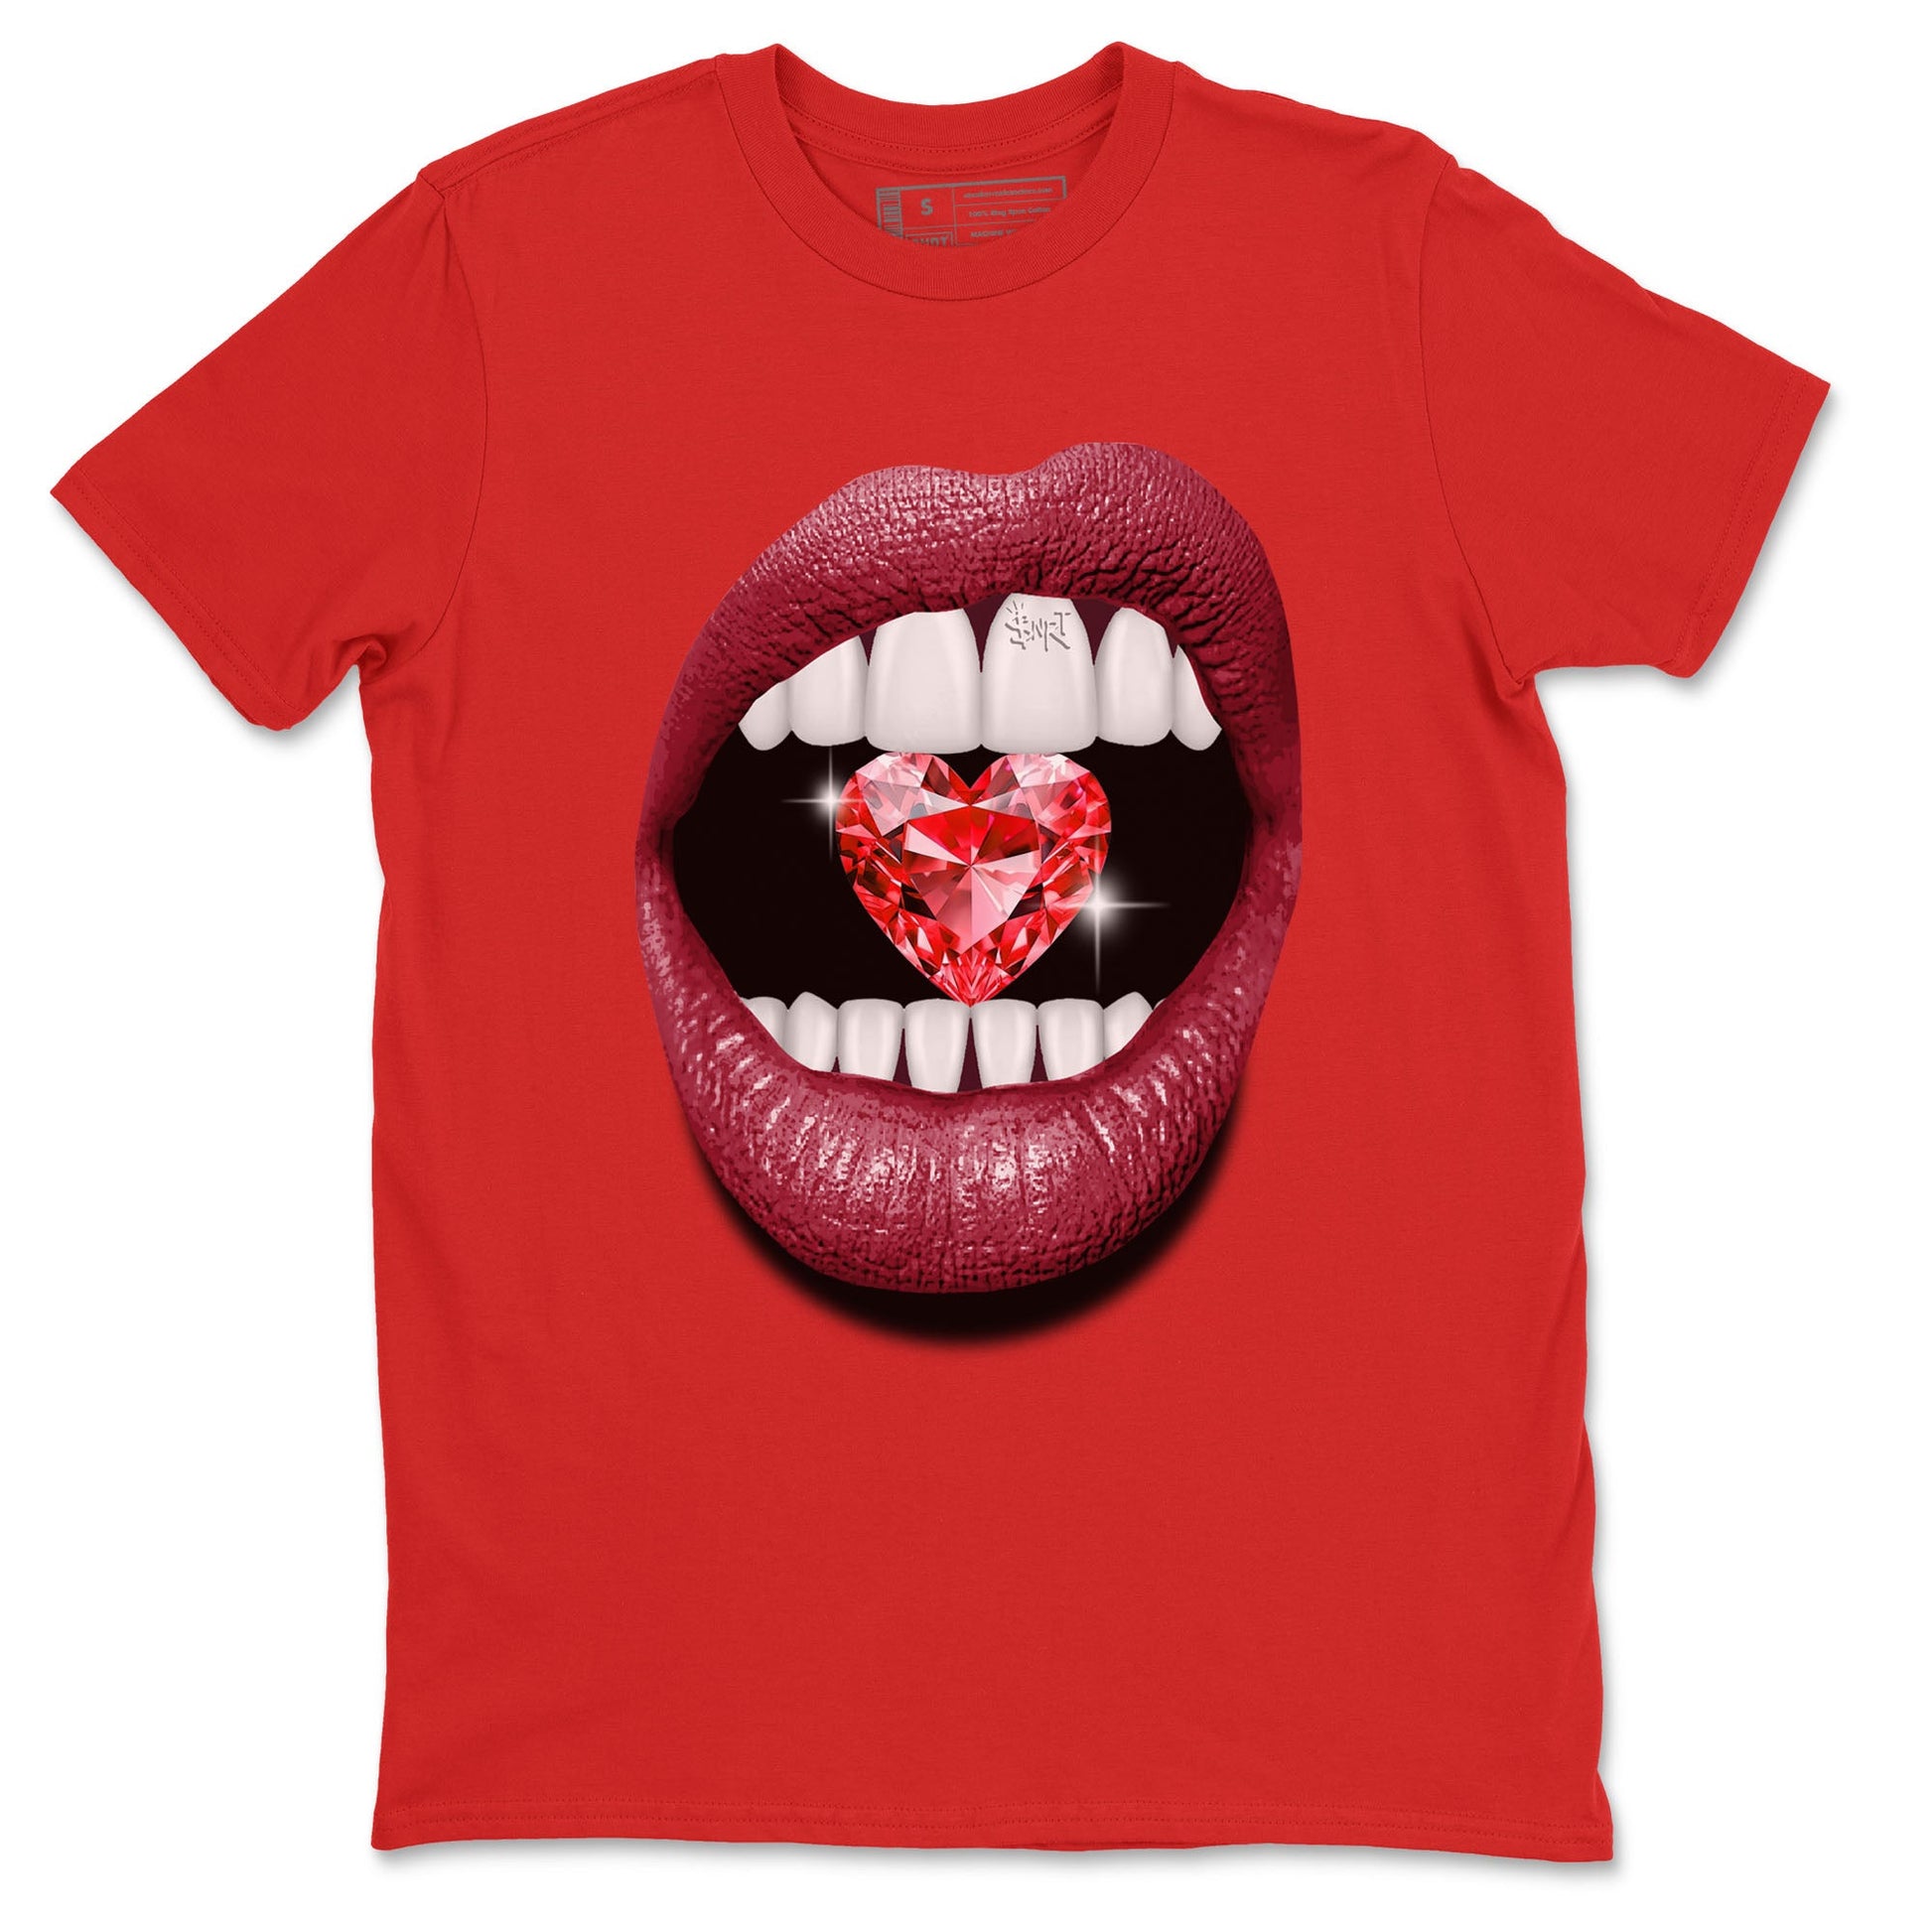 Lips Heart Diamond sneaker match tees to Special Valentine's Day street fashion brand for shirts to match Jordans SNRT Sneaker Tees Air Force 1 Valentines Day unisex t-shirt Red 2 unisex shirt